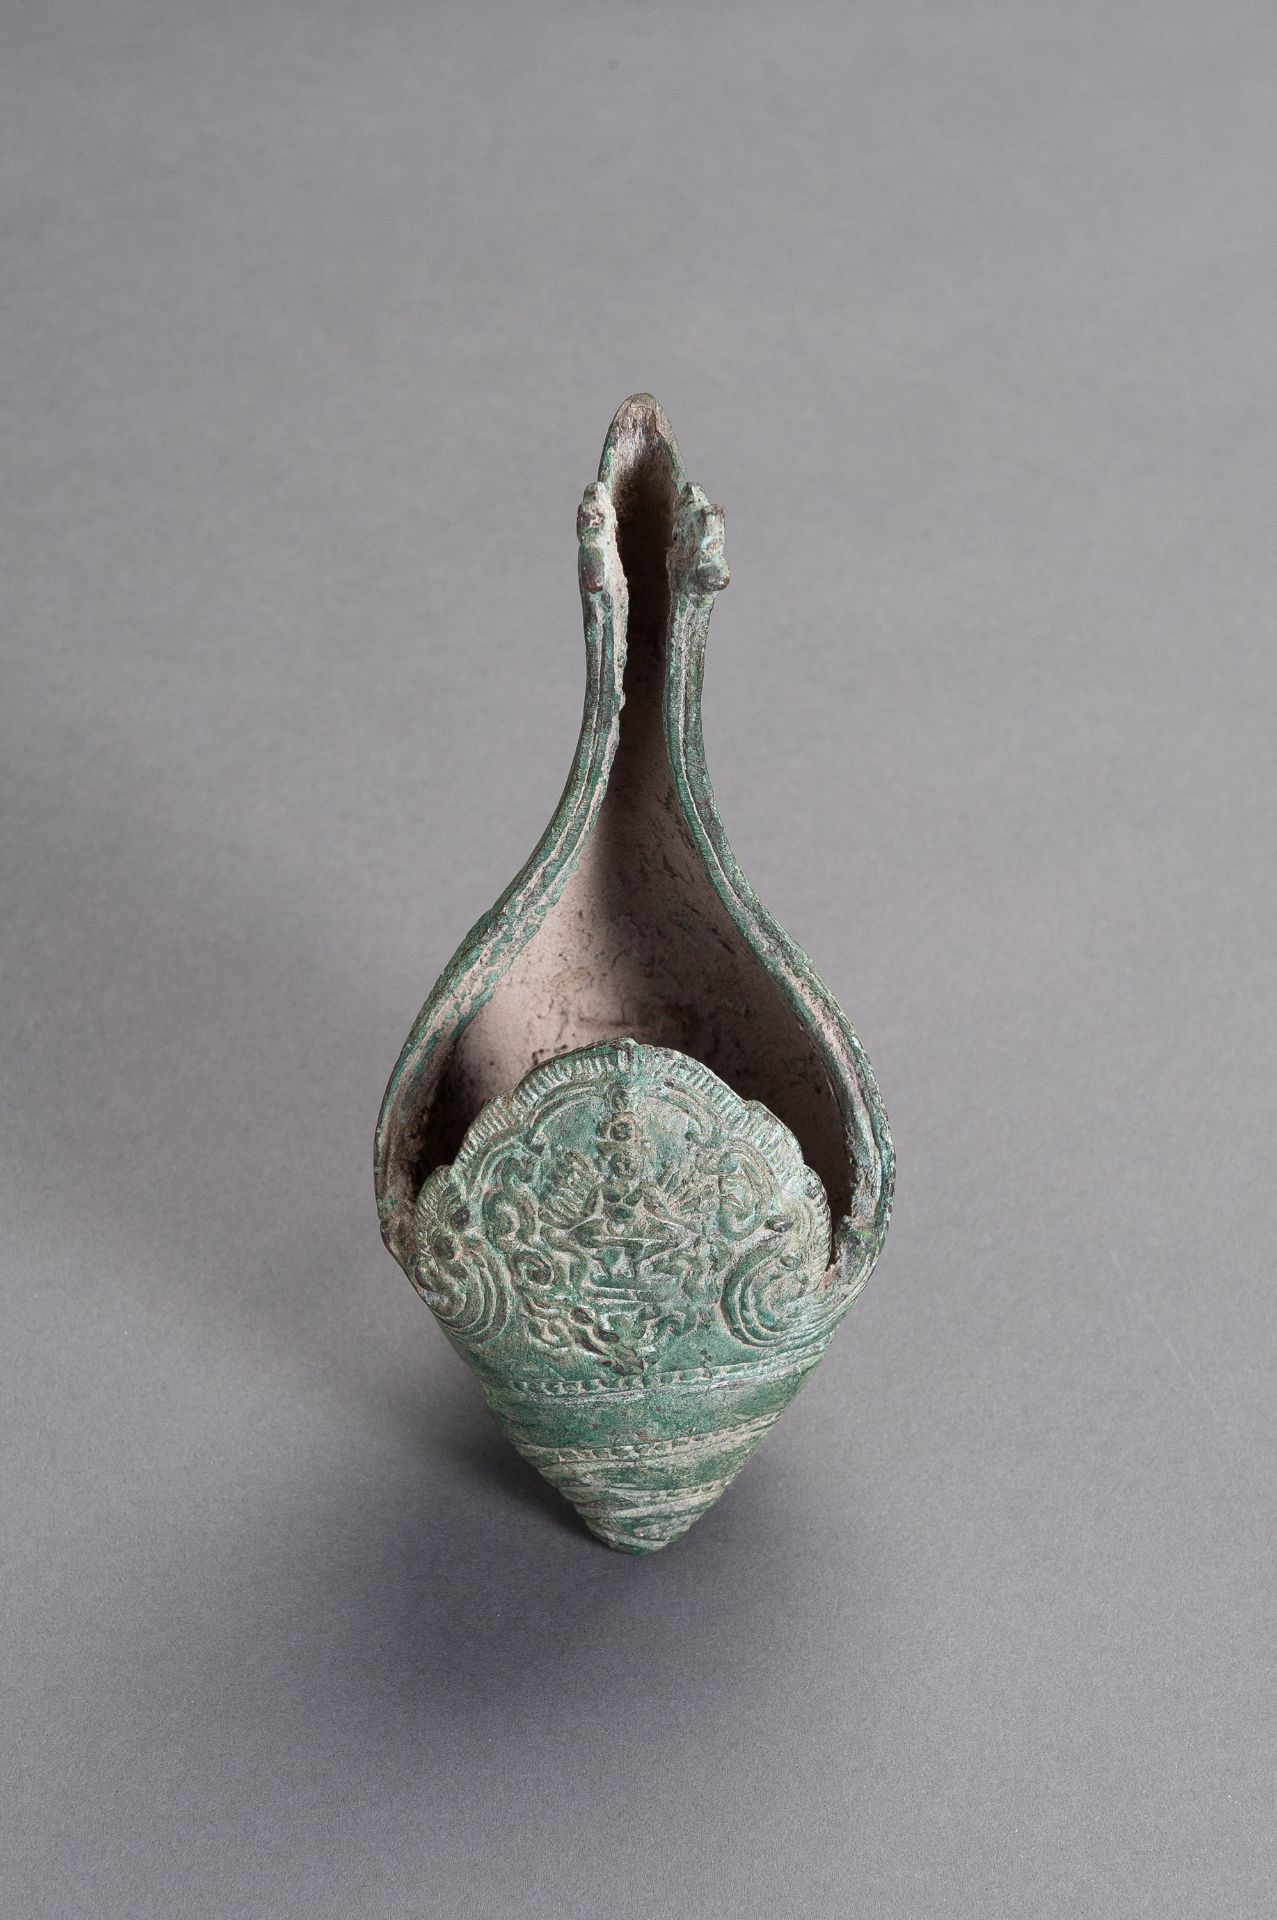 A BRONZE KHMER CONCH SHELL - Image 11 of 12